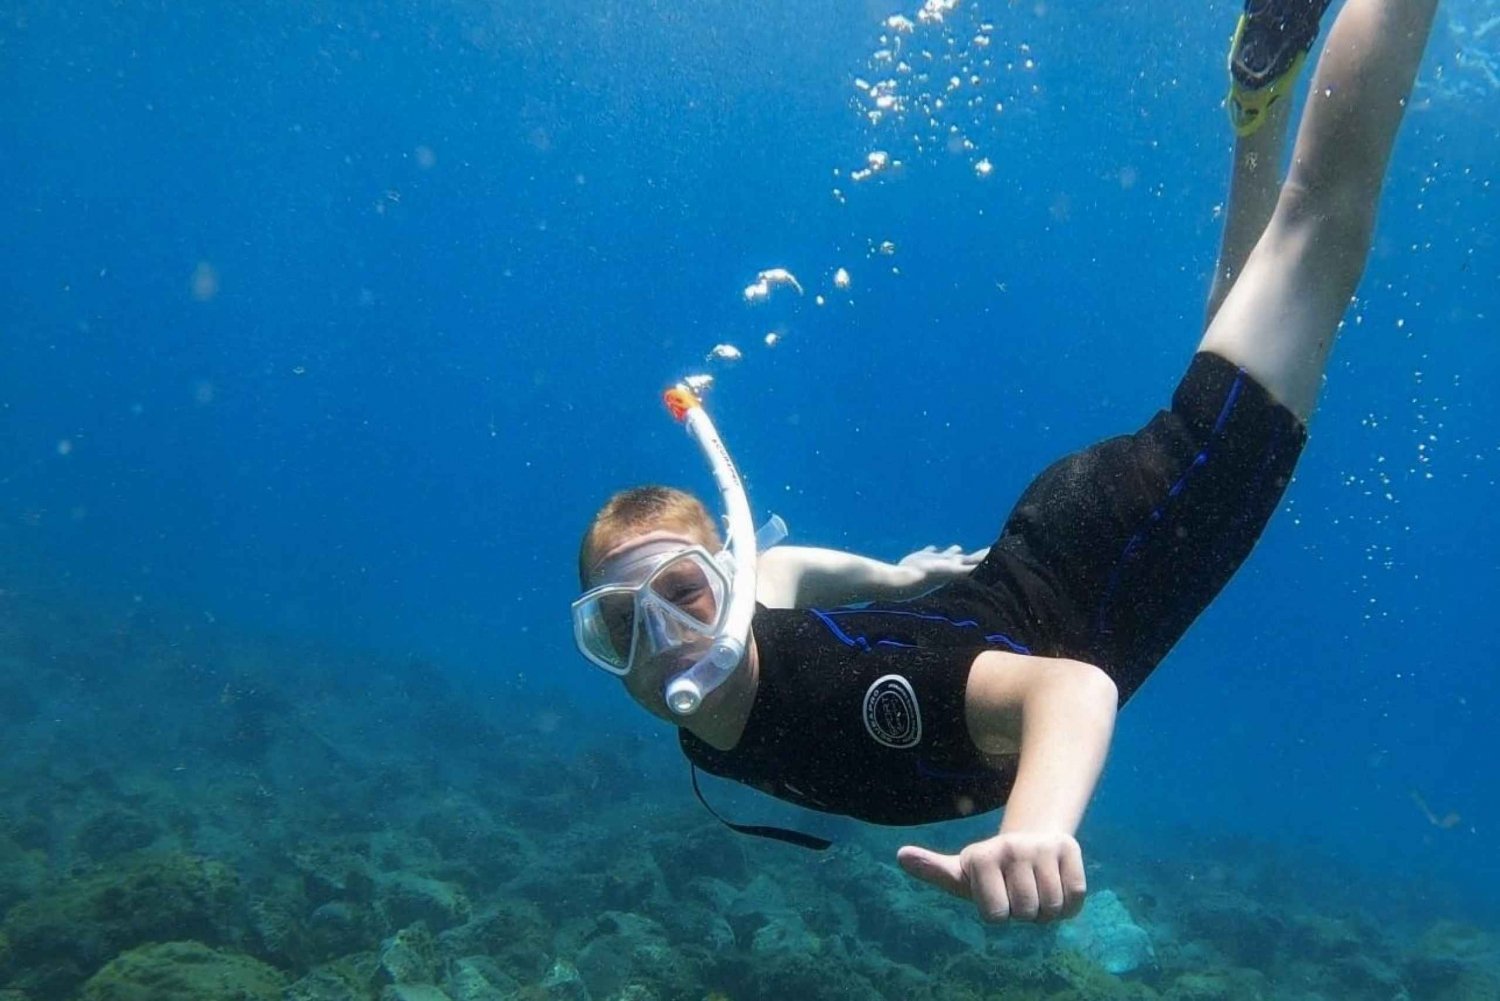 Tenerife: Turtle Bay Snorkel Discovery with Video